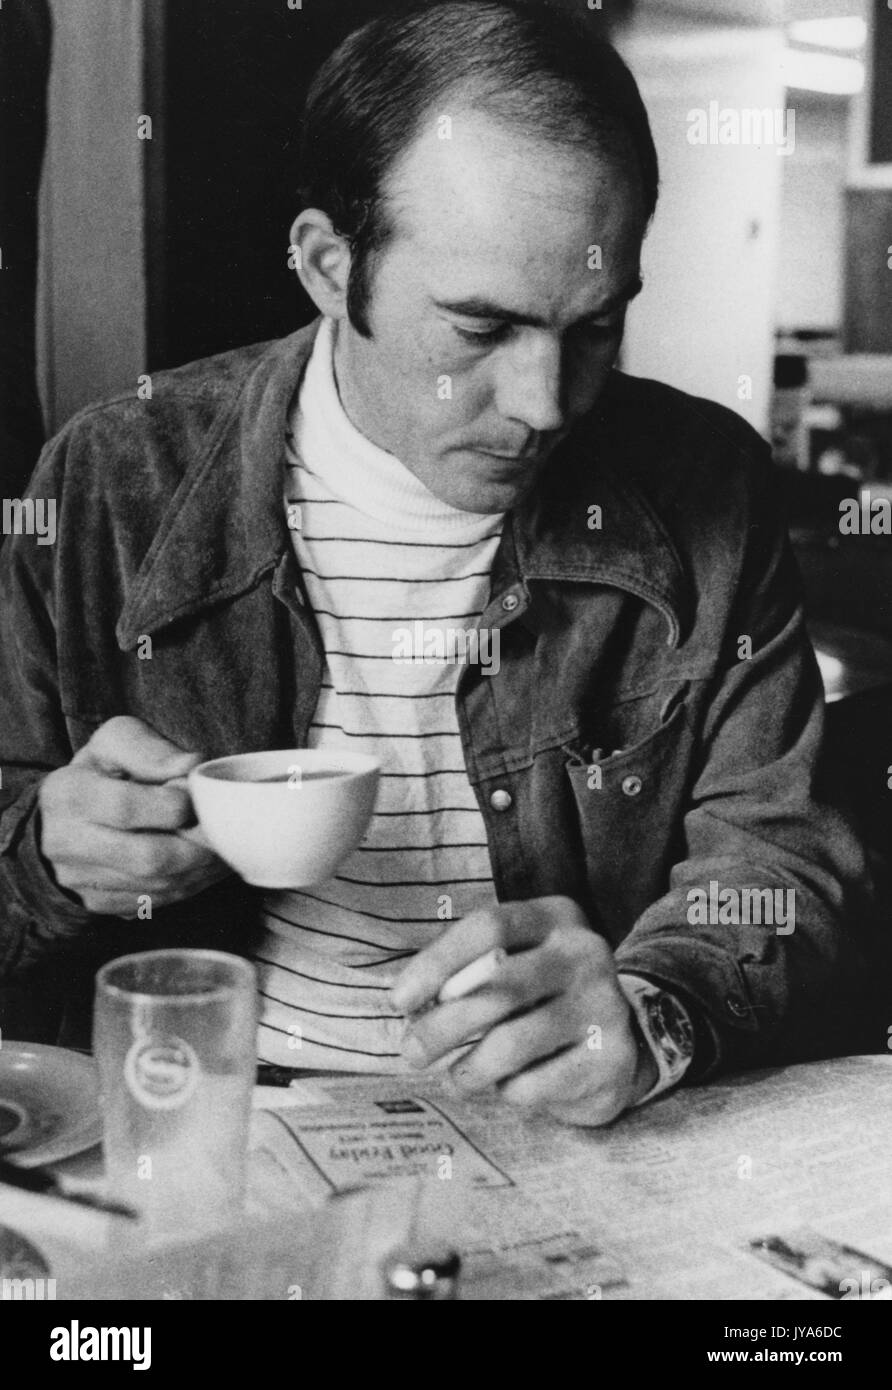 A half-length portrait of founder of the gonzo journalism movement Hunter Thompson as he intently reads the newspaper while drinking a cup of coffee, who spoke at the Milton S. Eisenhower Symposium, a lecture series at Johns Hopkins University, Baltimore, Maryland. 1975. Stock Photo